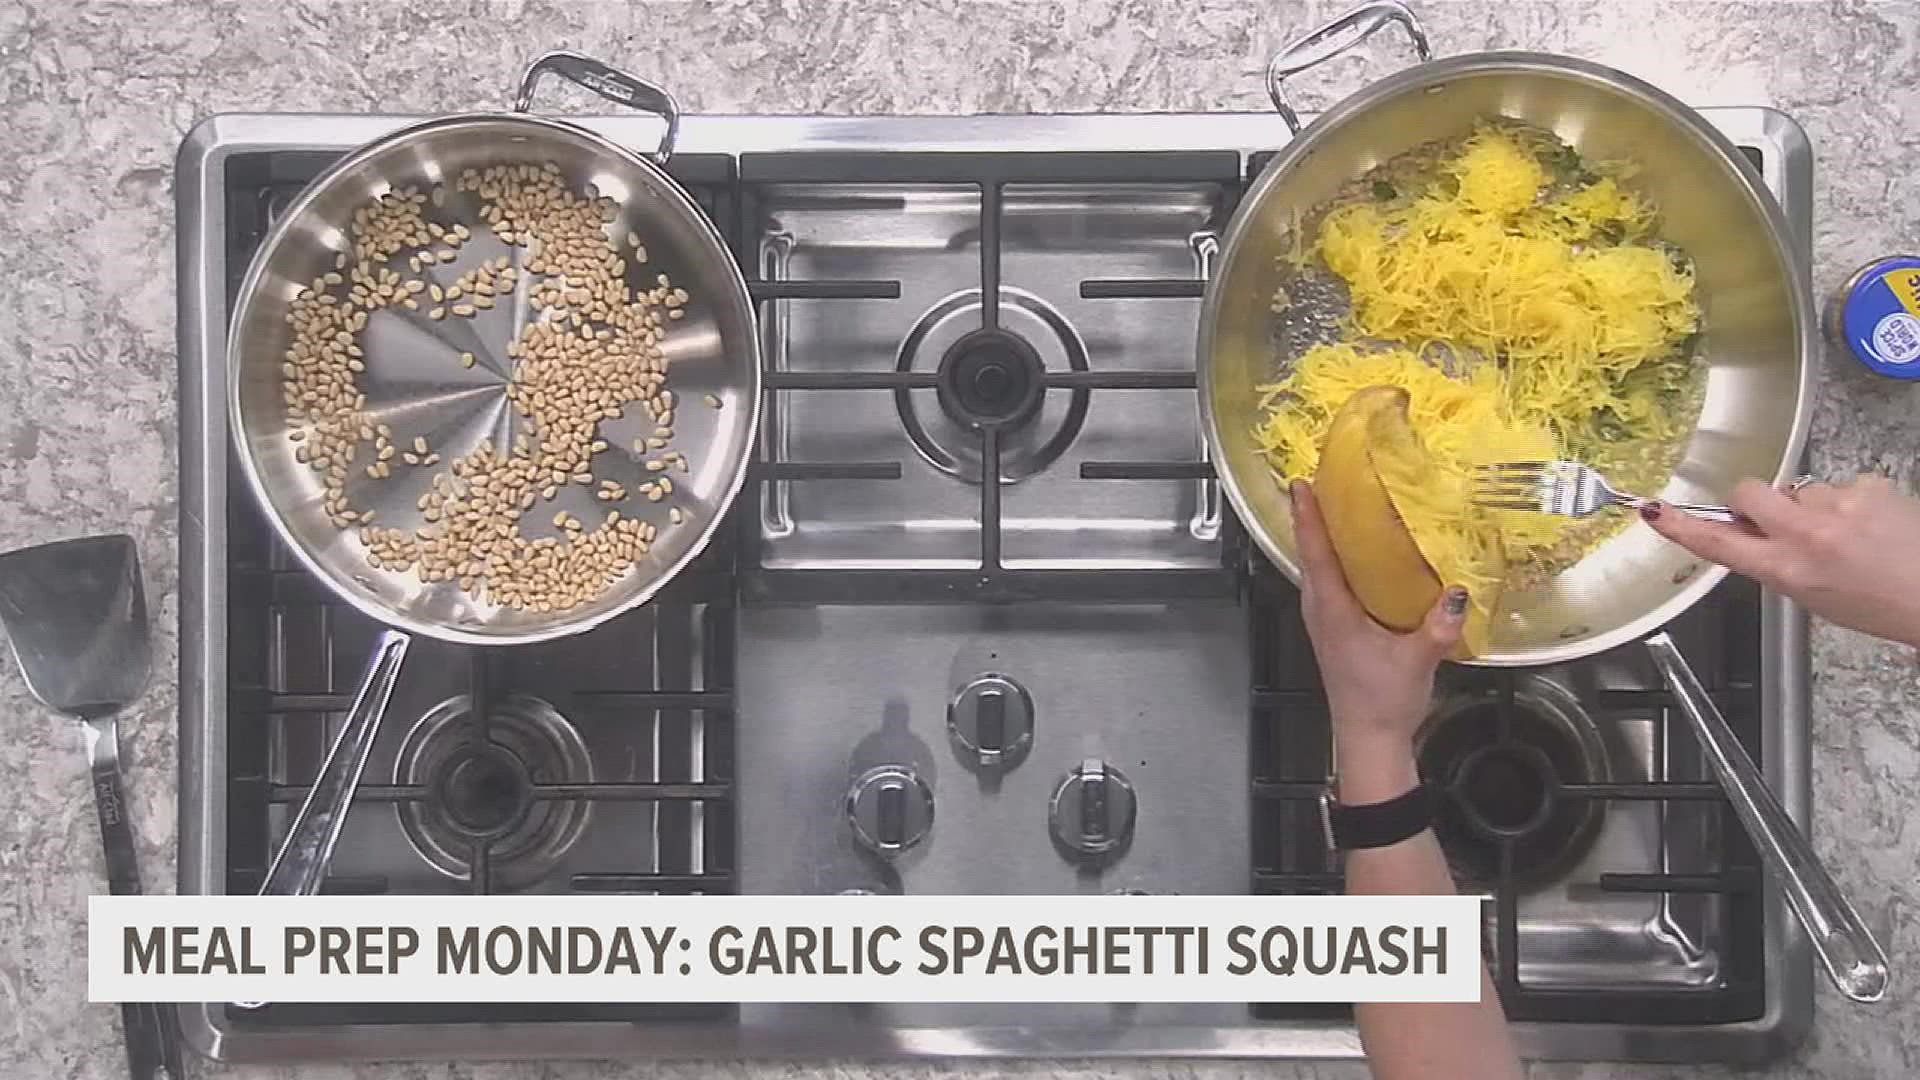 News 8's Shelby Kluver teams up with Hy-Vee Registered Dietitian Nina Struss to make this easy, delicious meal.